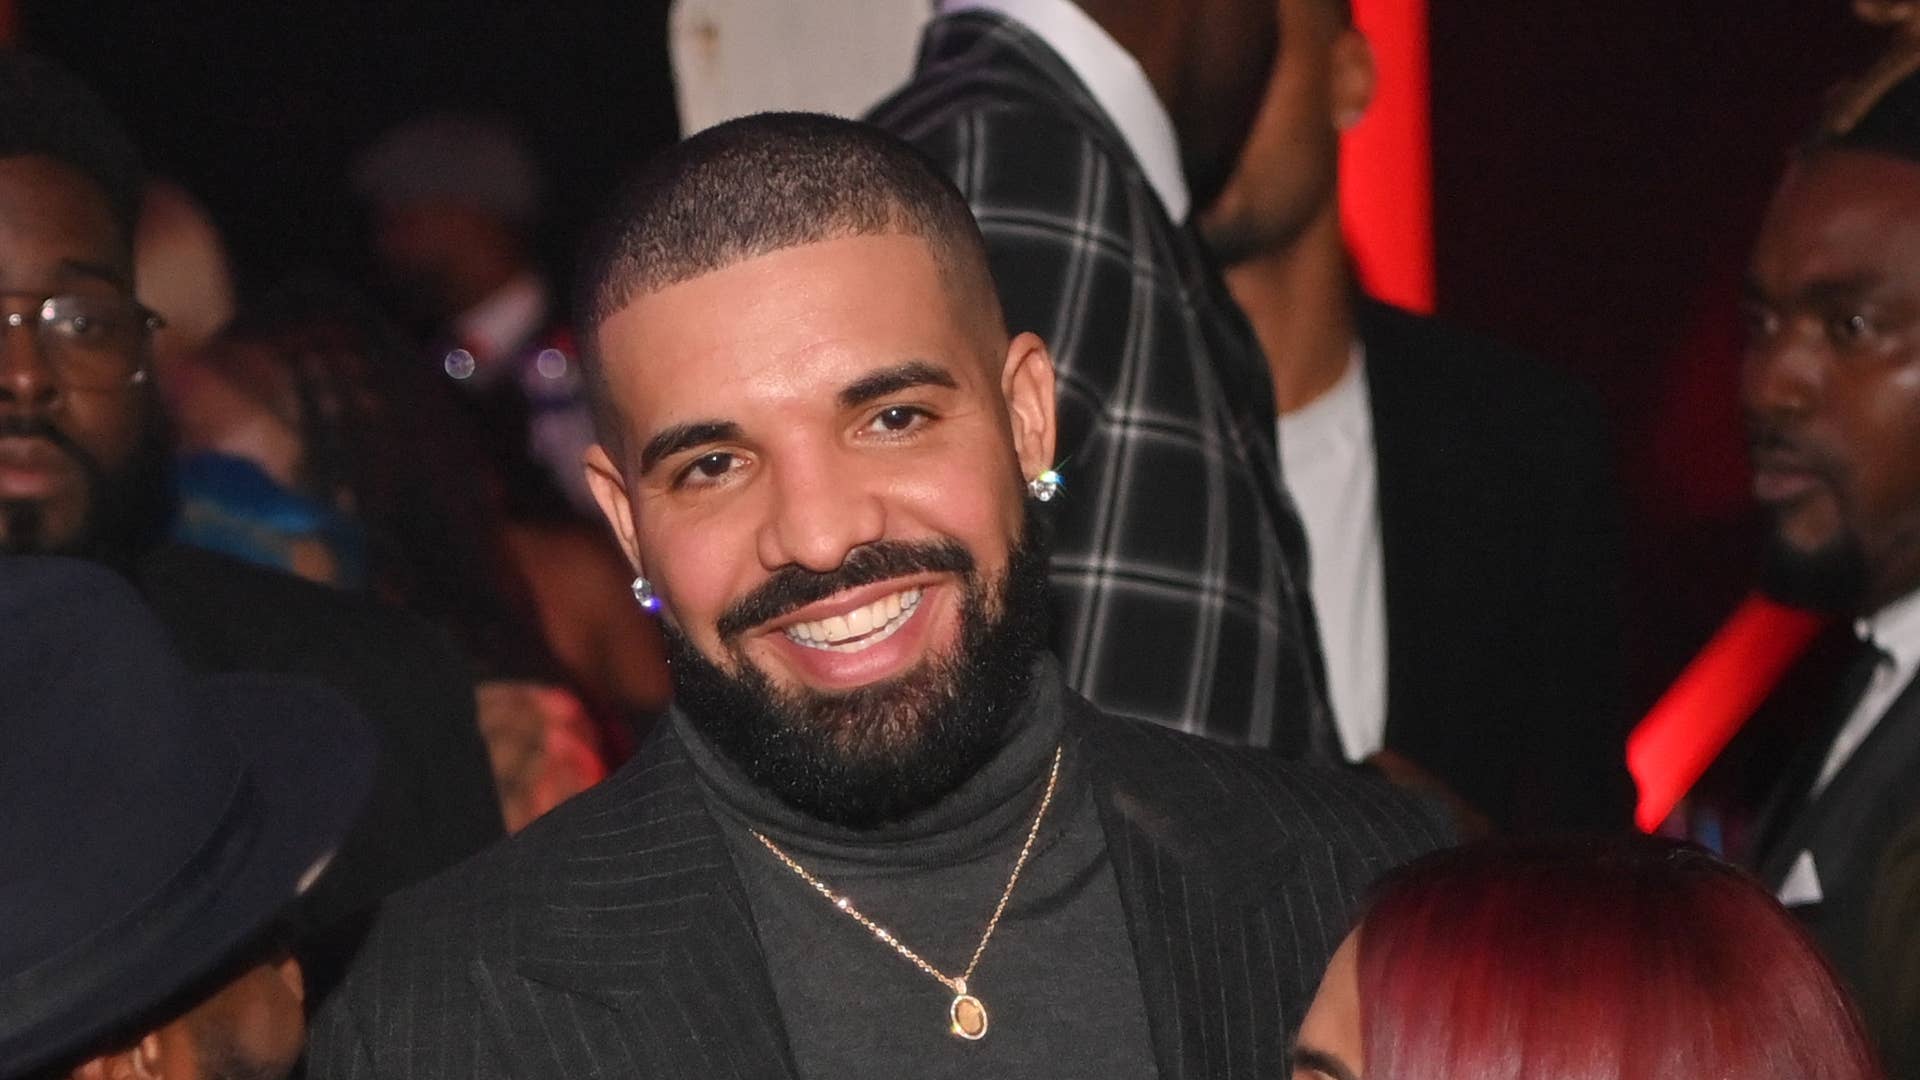 Drake is seen at an event wearing a turtleneck